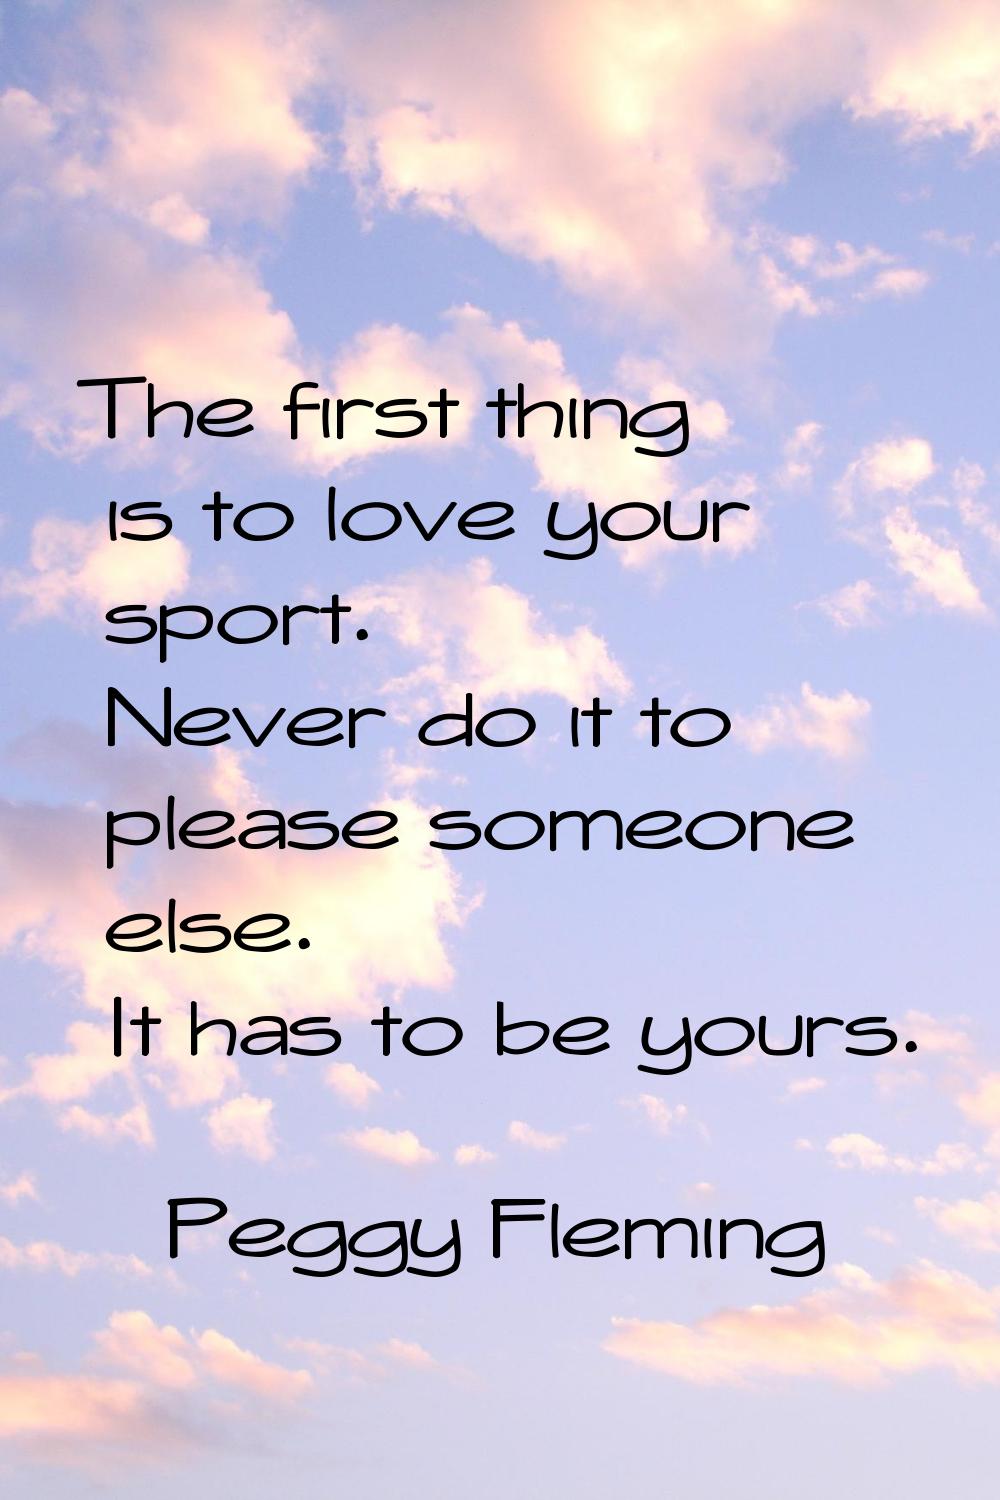 The first thing is to love your sport. Never do it to please someone else. It has to be yours.